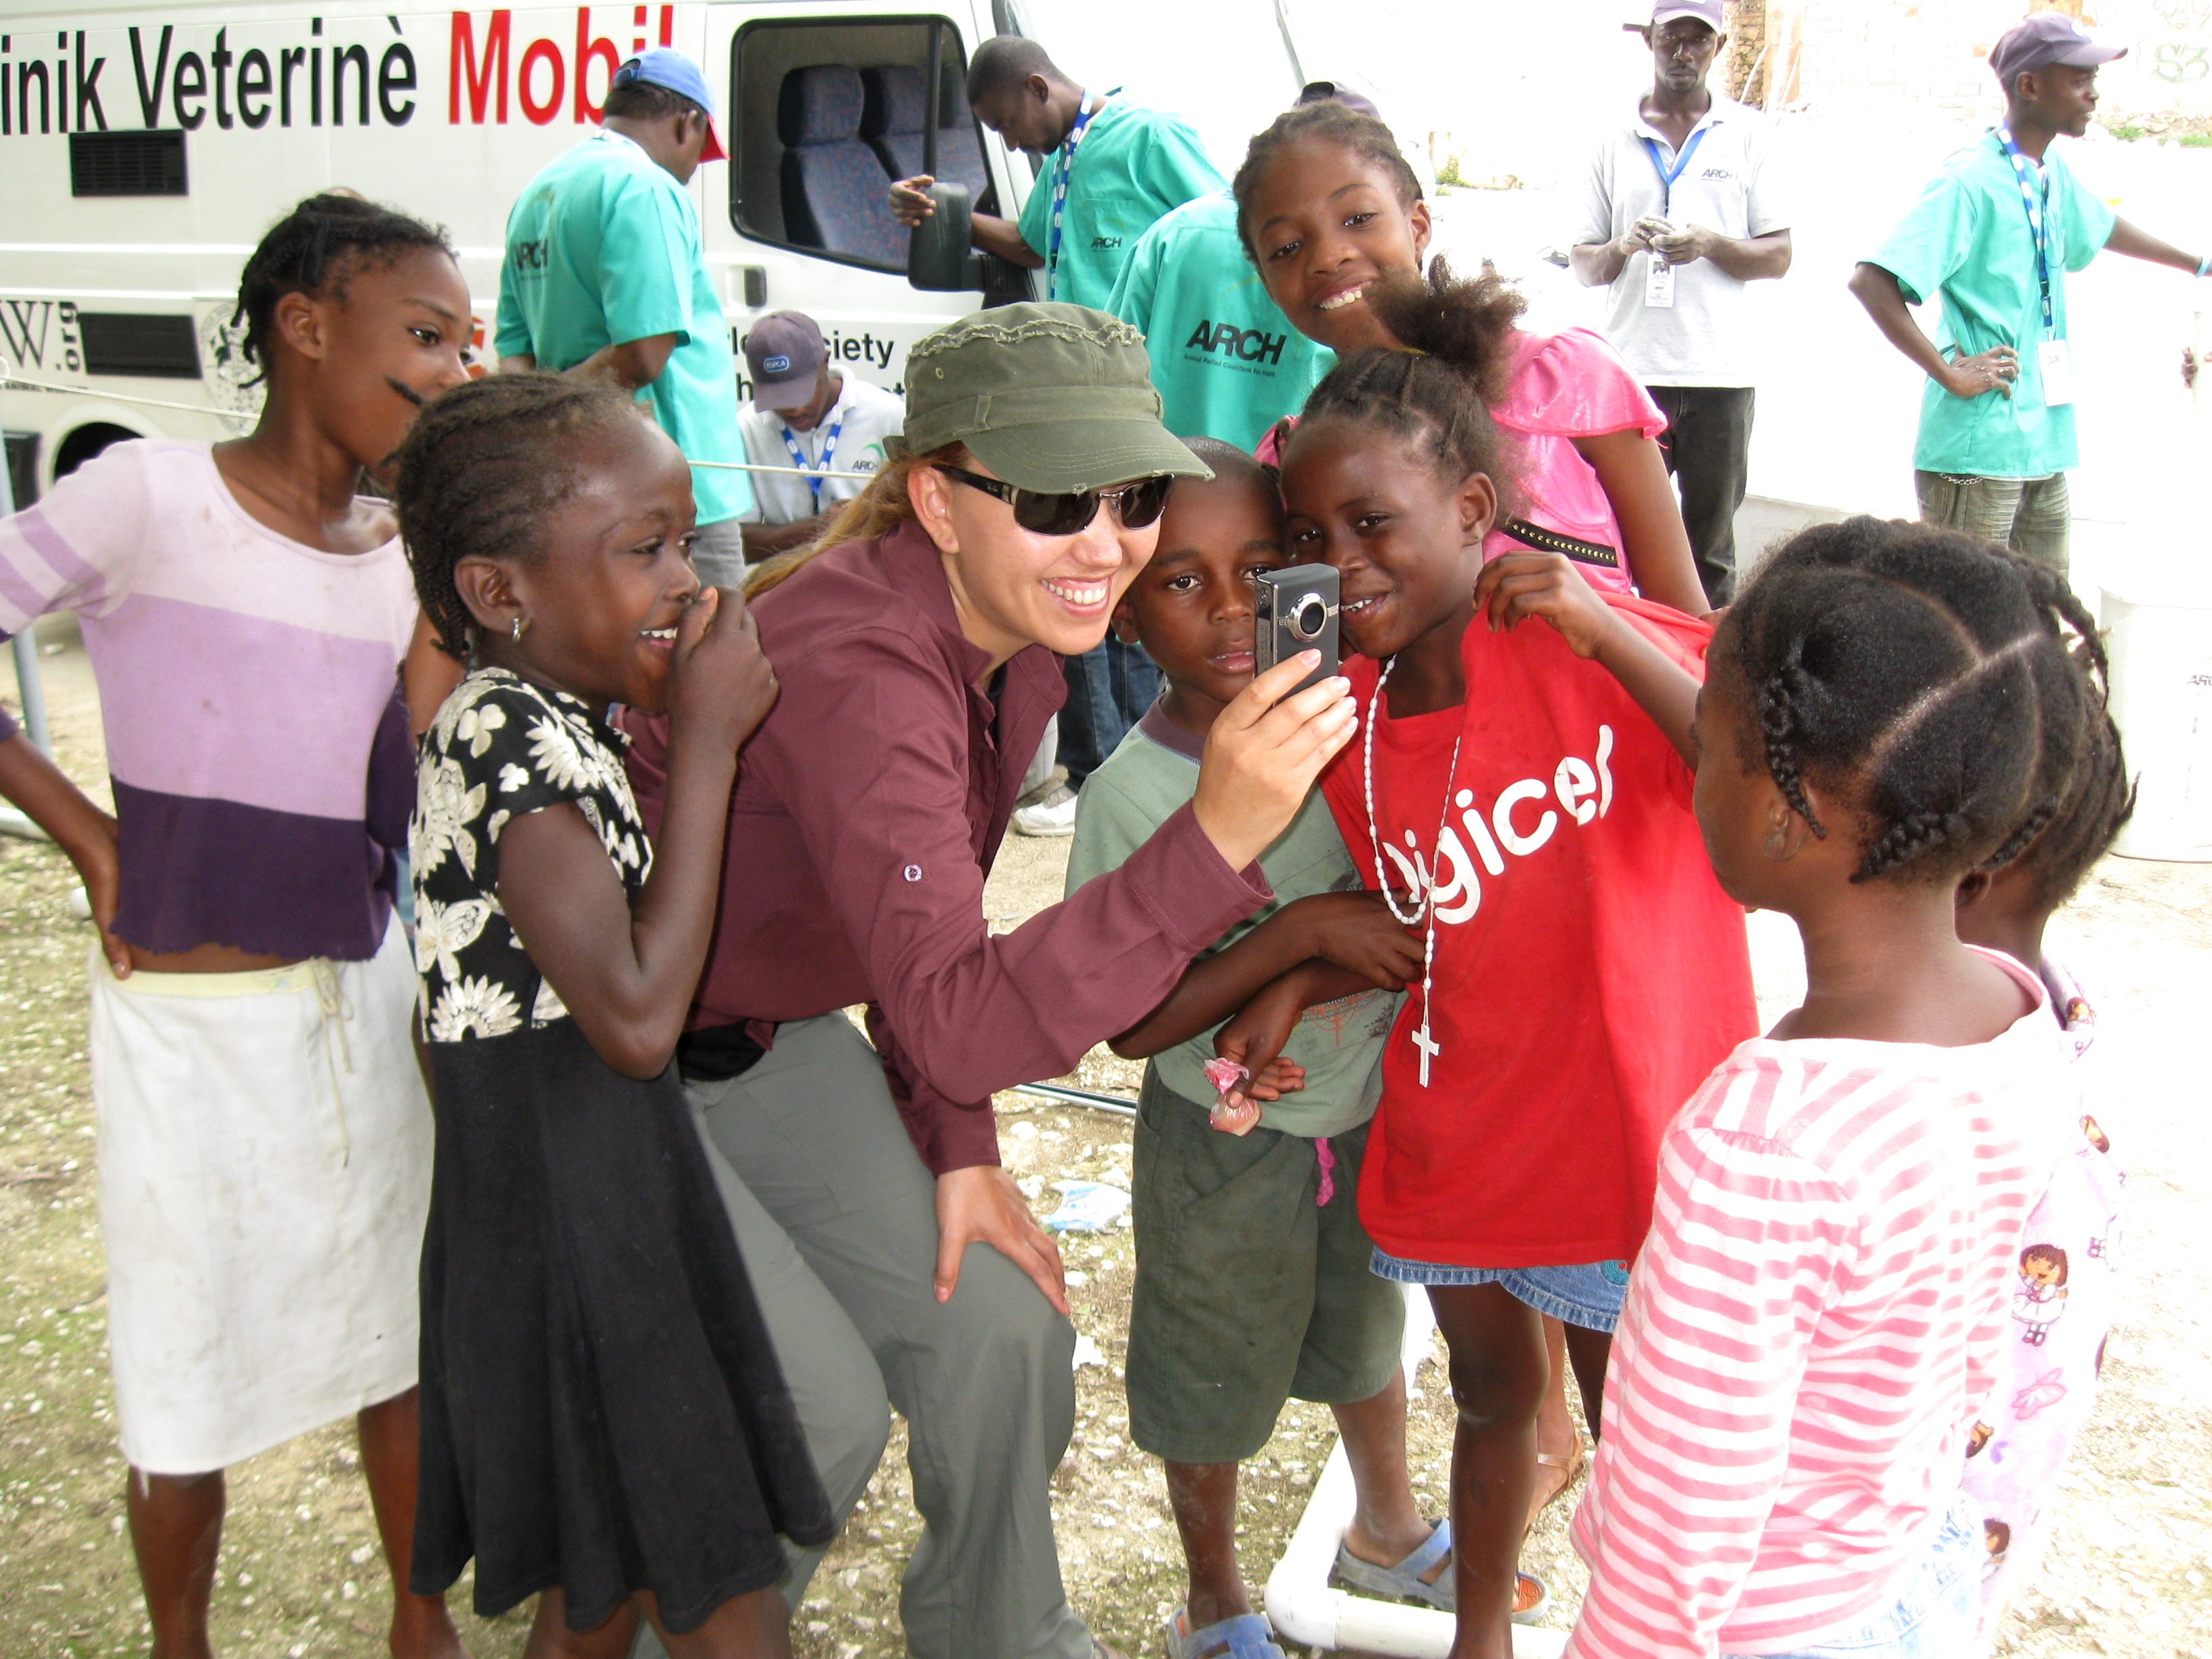 During a trip to Haiti to assist Animal Rescue Coalition for Haiti (ARCH).